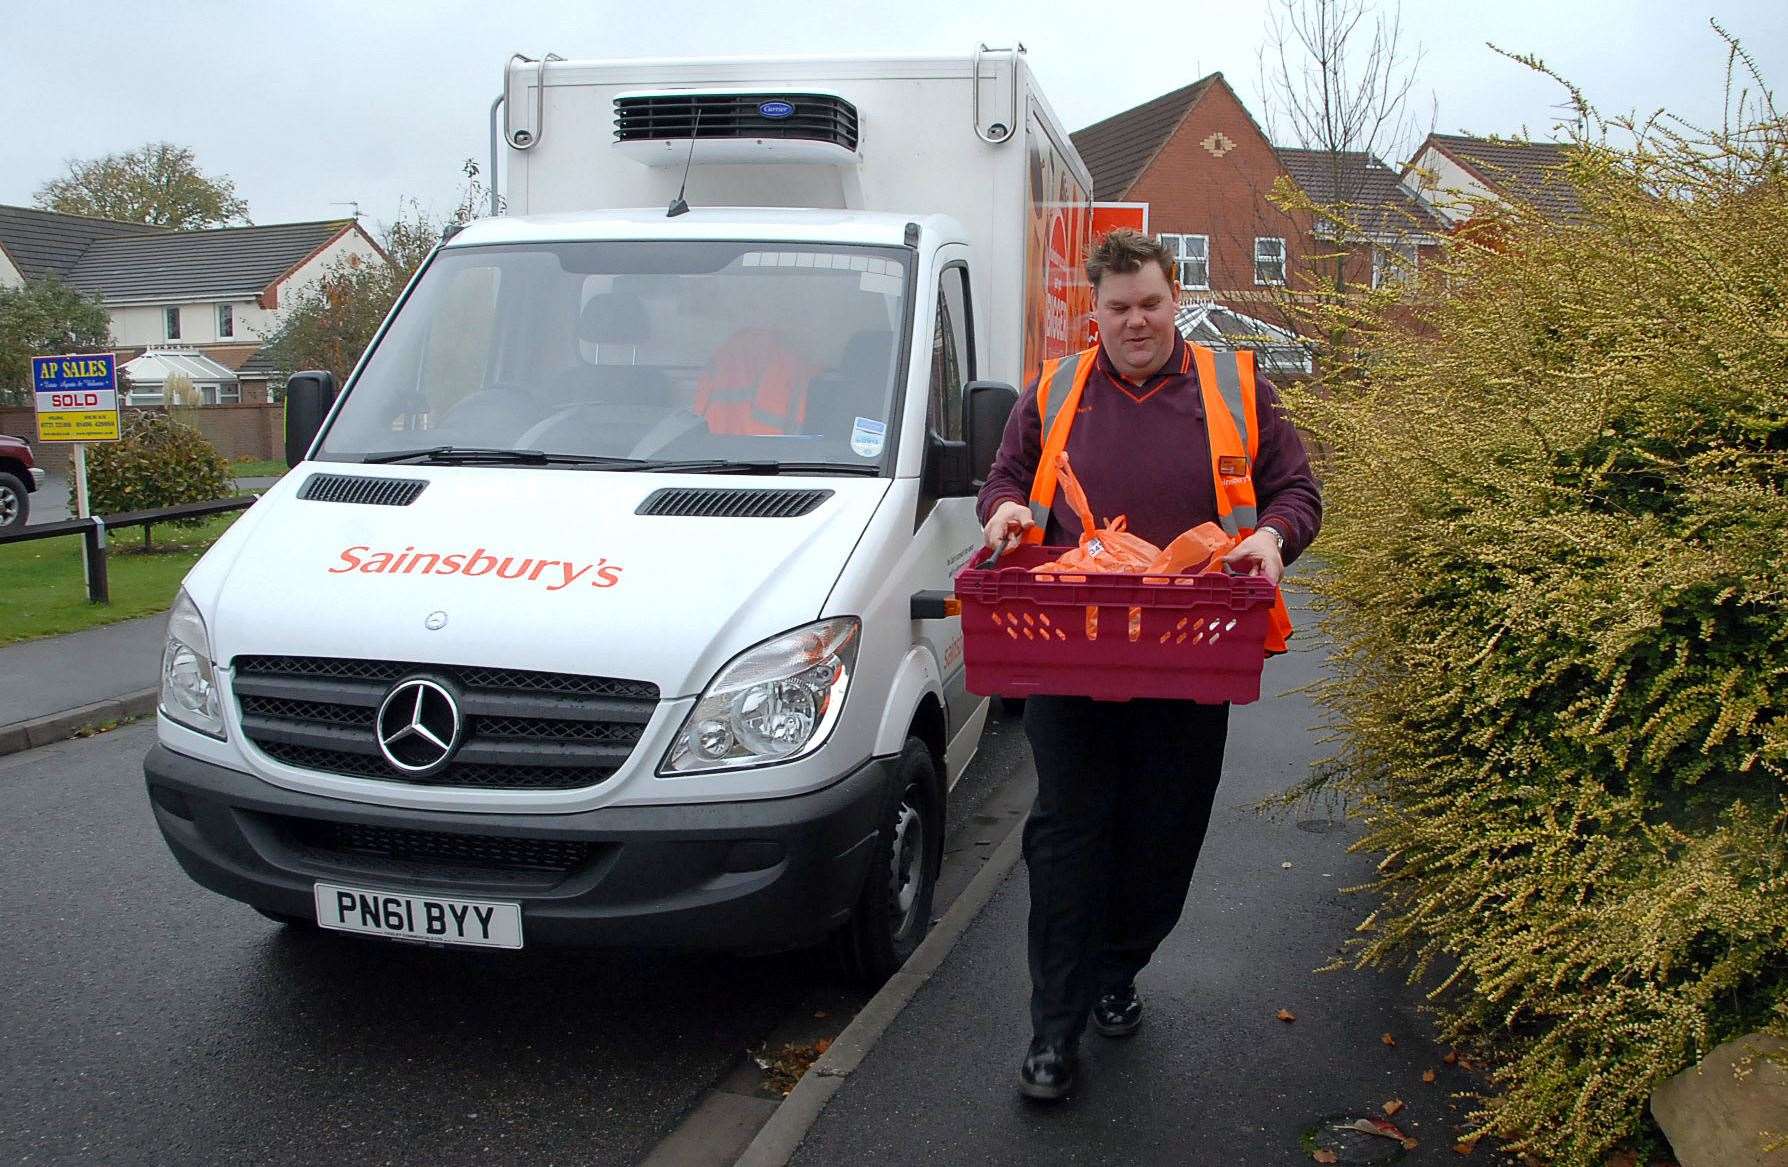 Sainsbury's is prioritising deliveries for over 70, disabled and vulnerable customers